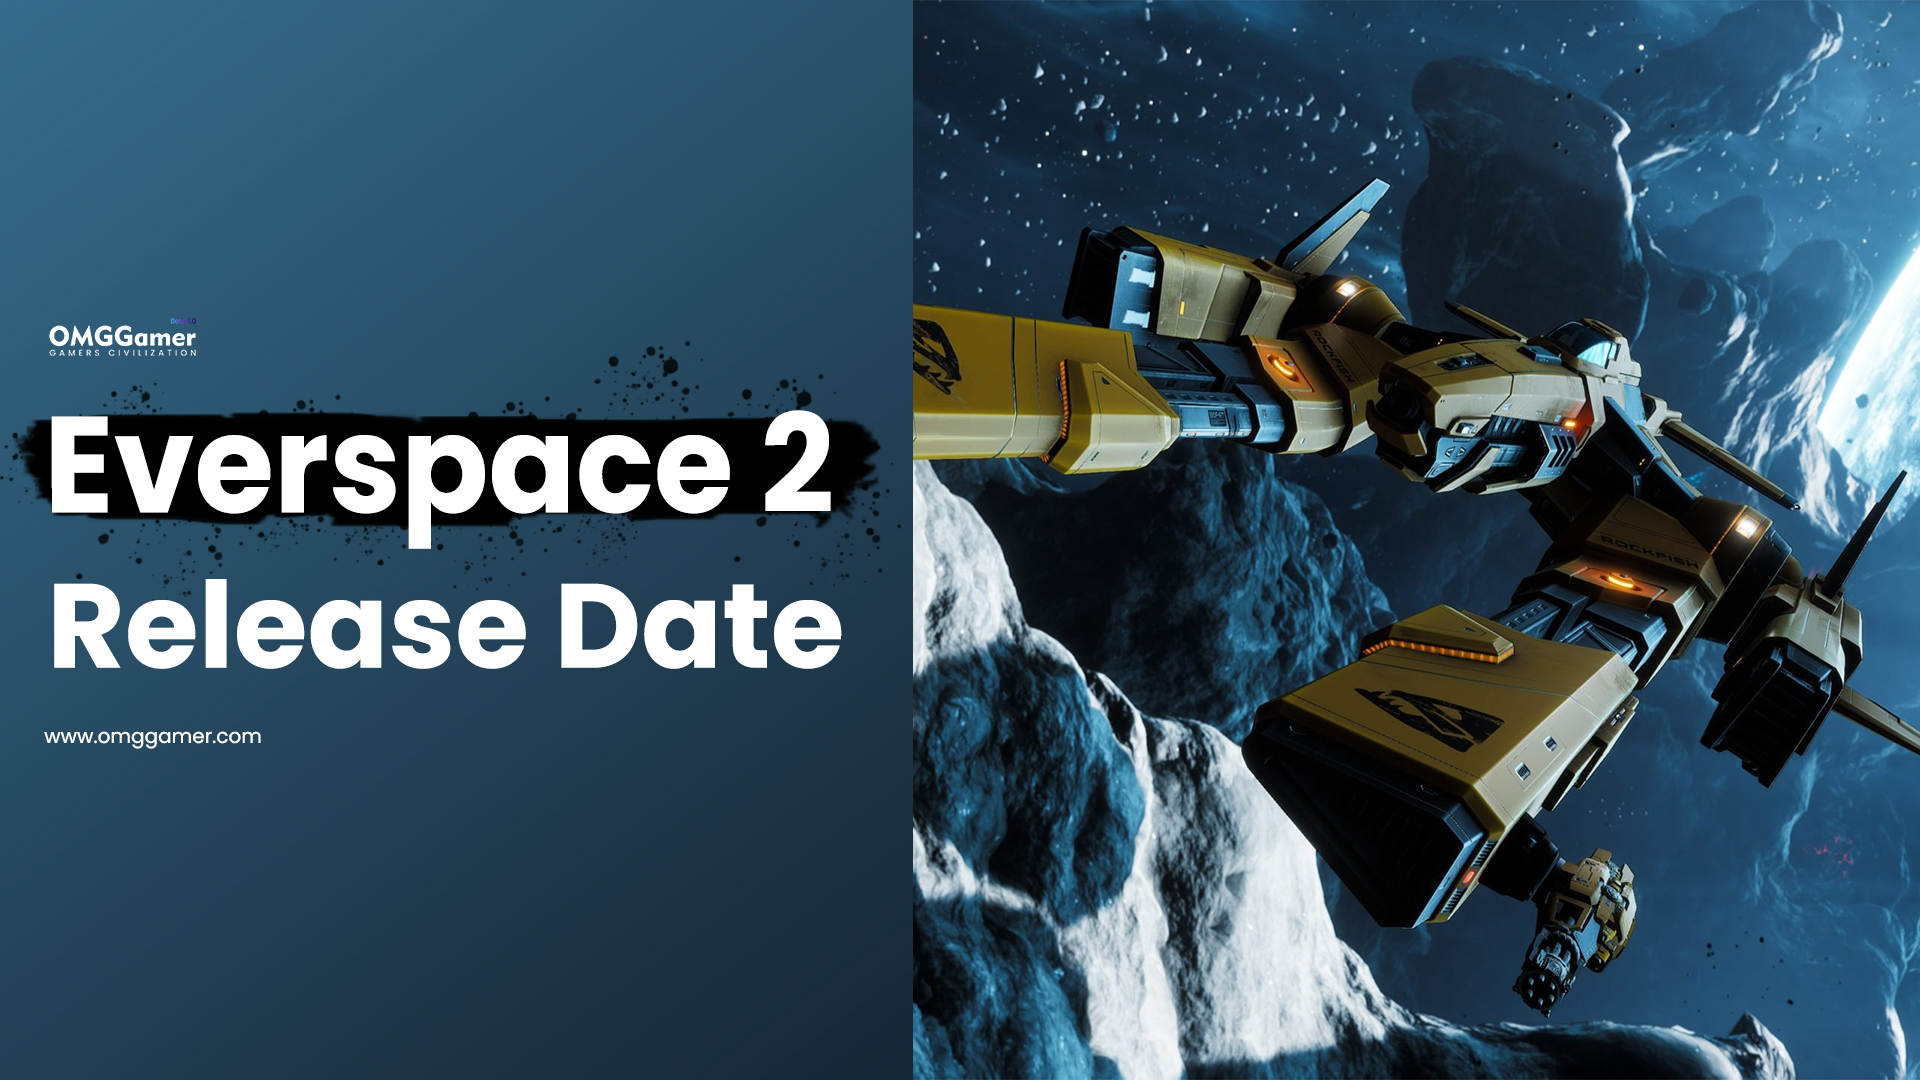 Everspace 2 Release Date